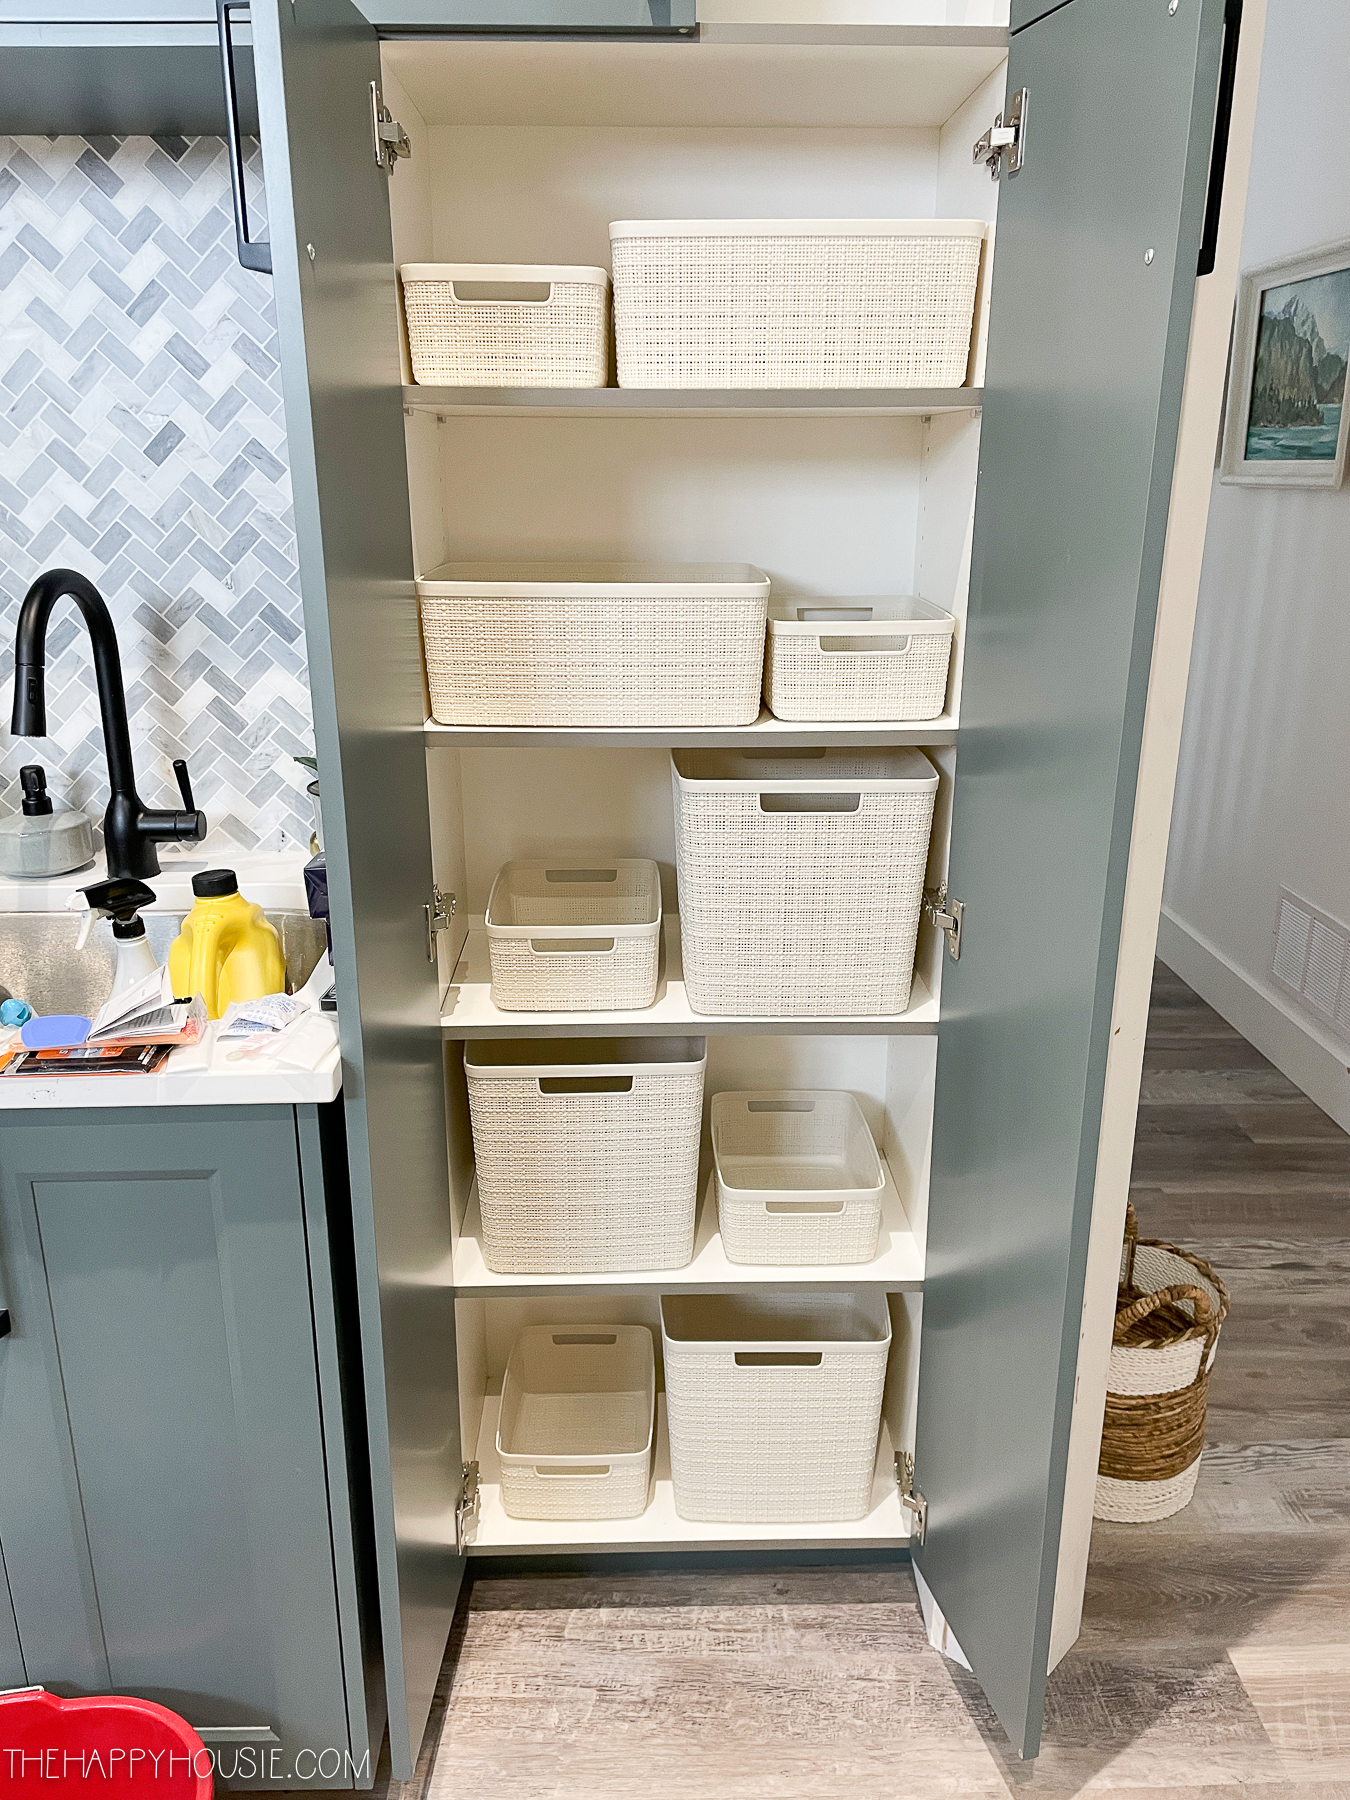 The open cupboard doors beside the sink with white basket only on the shelves.